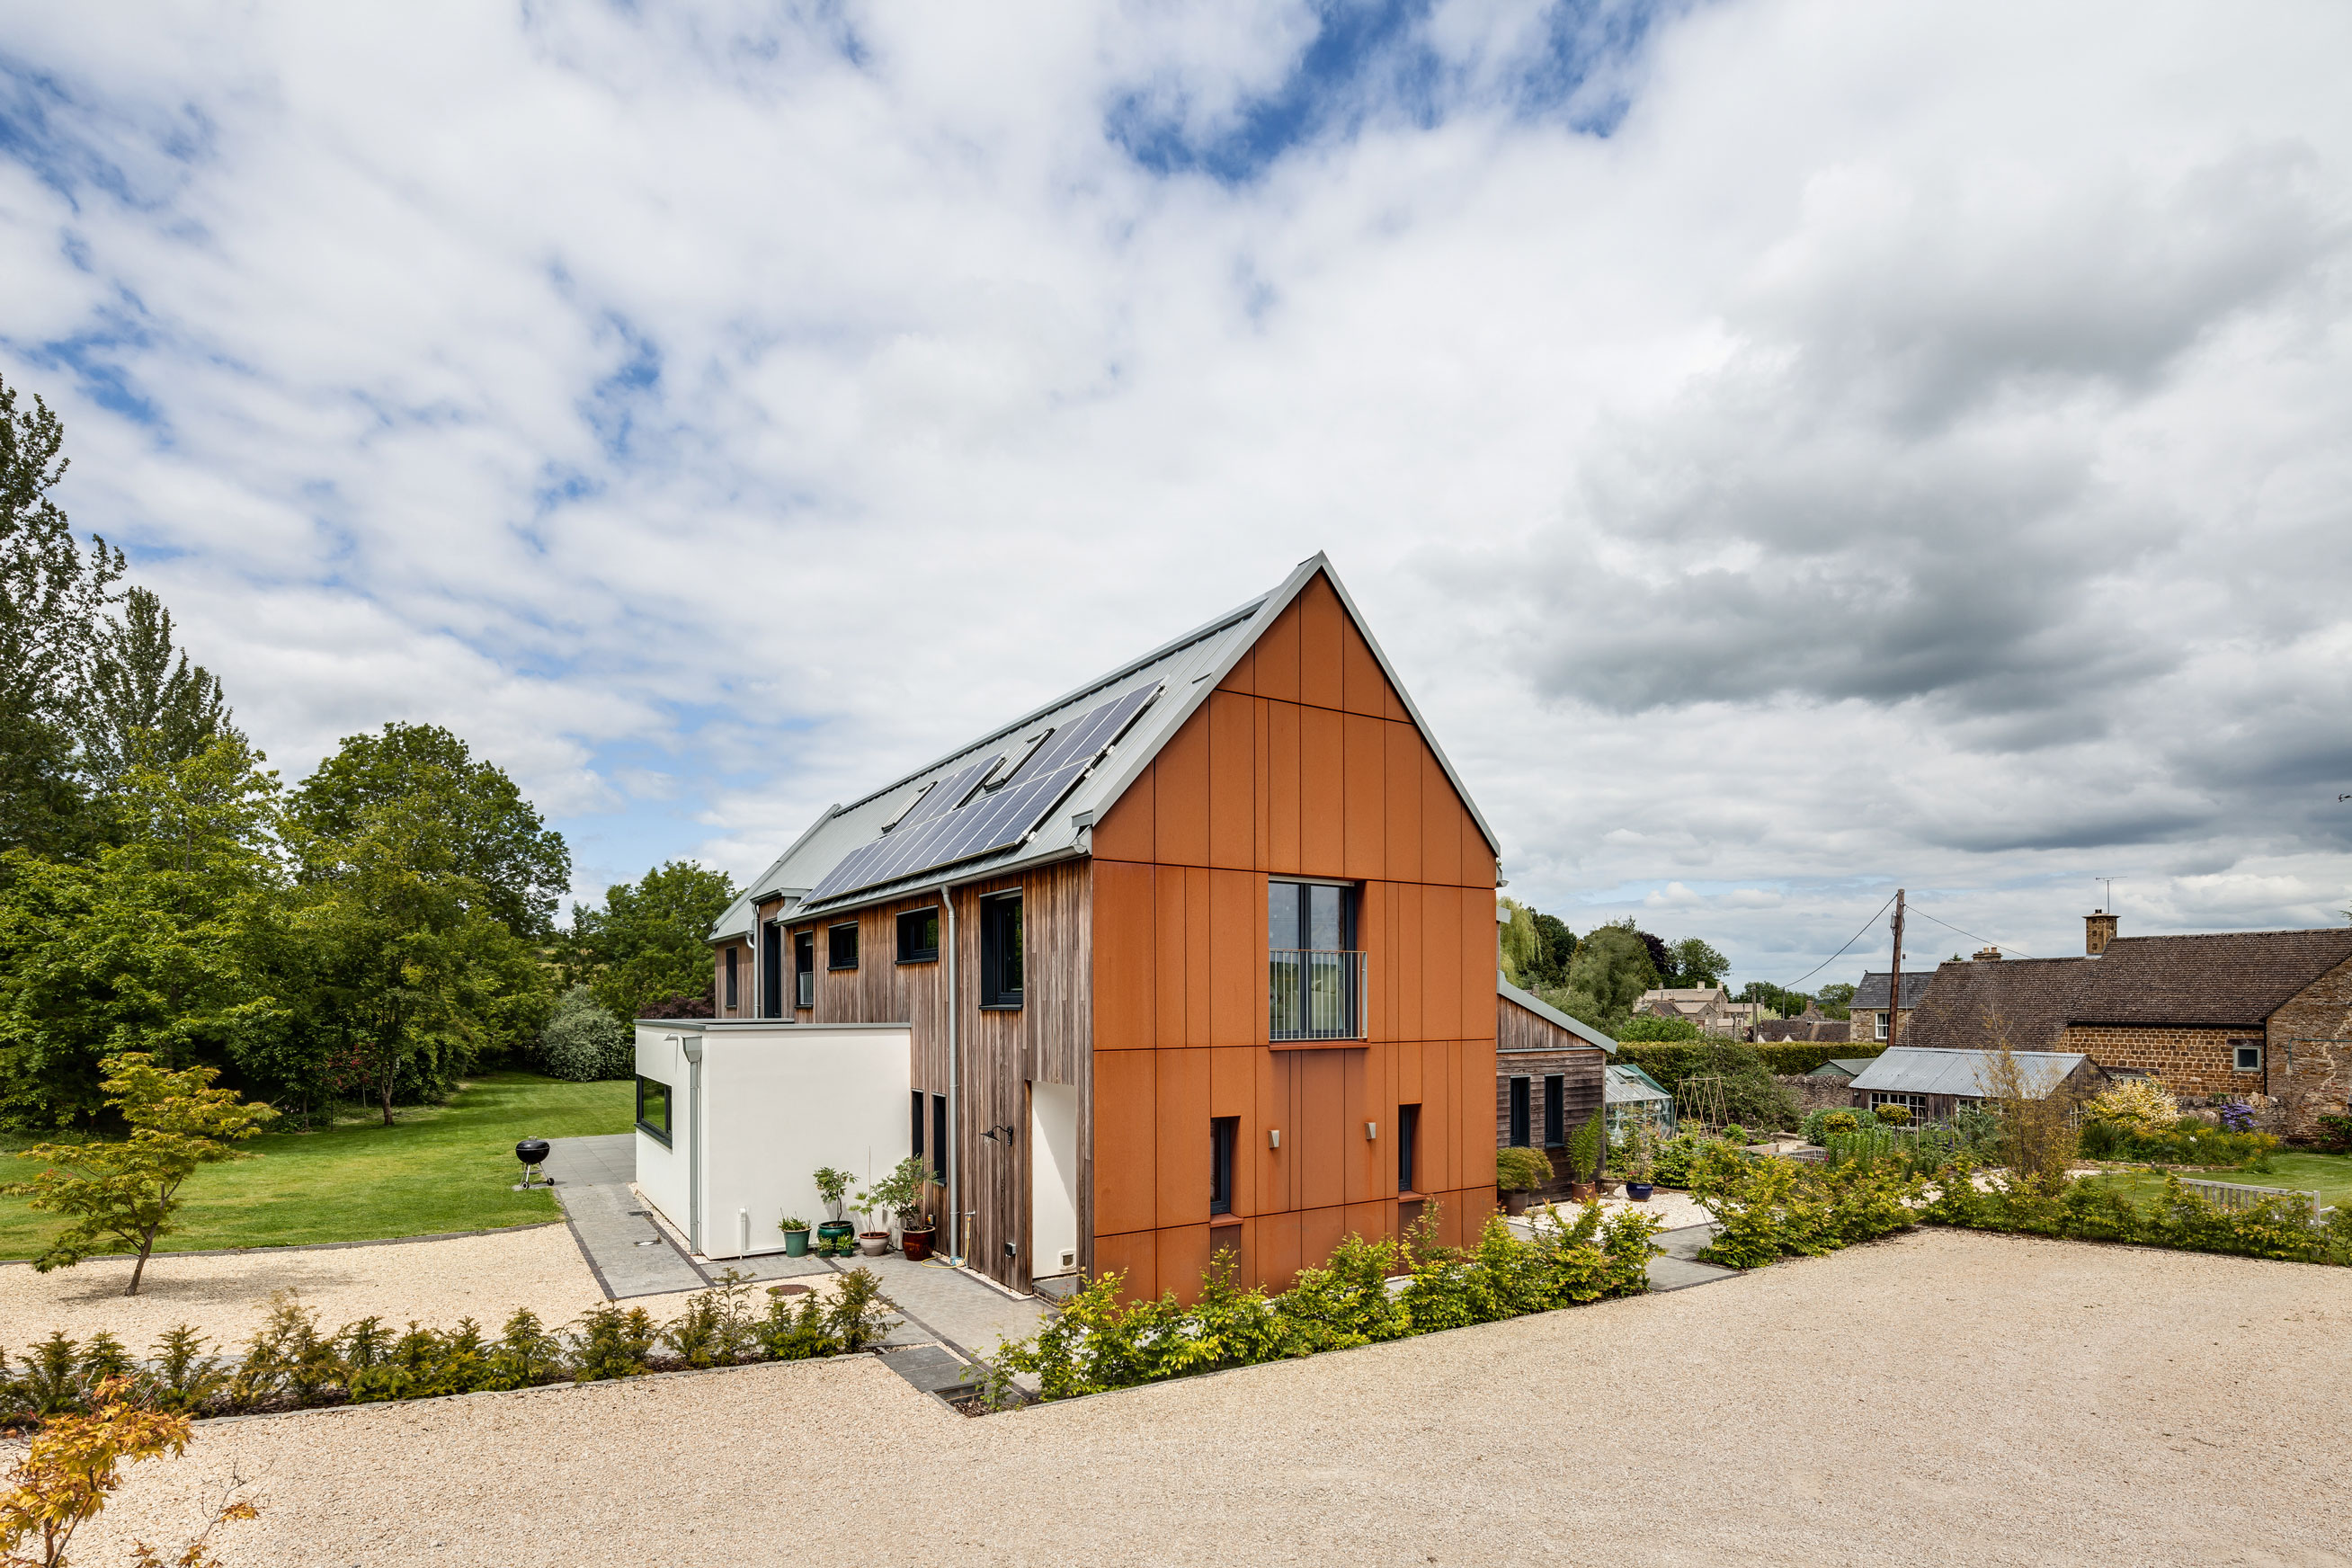 Eco home improvements: how to make your house greener | Homes & Gardens